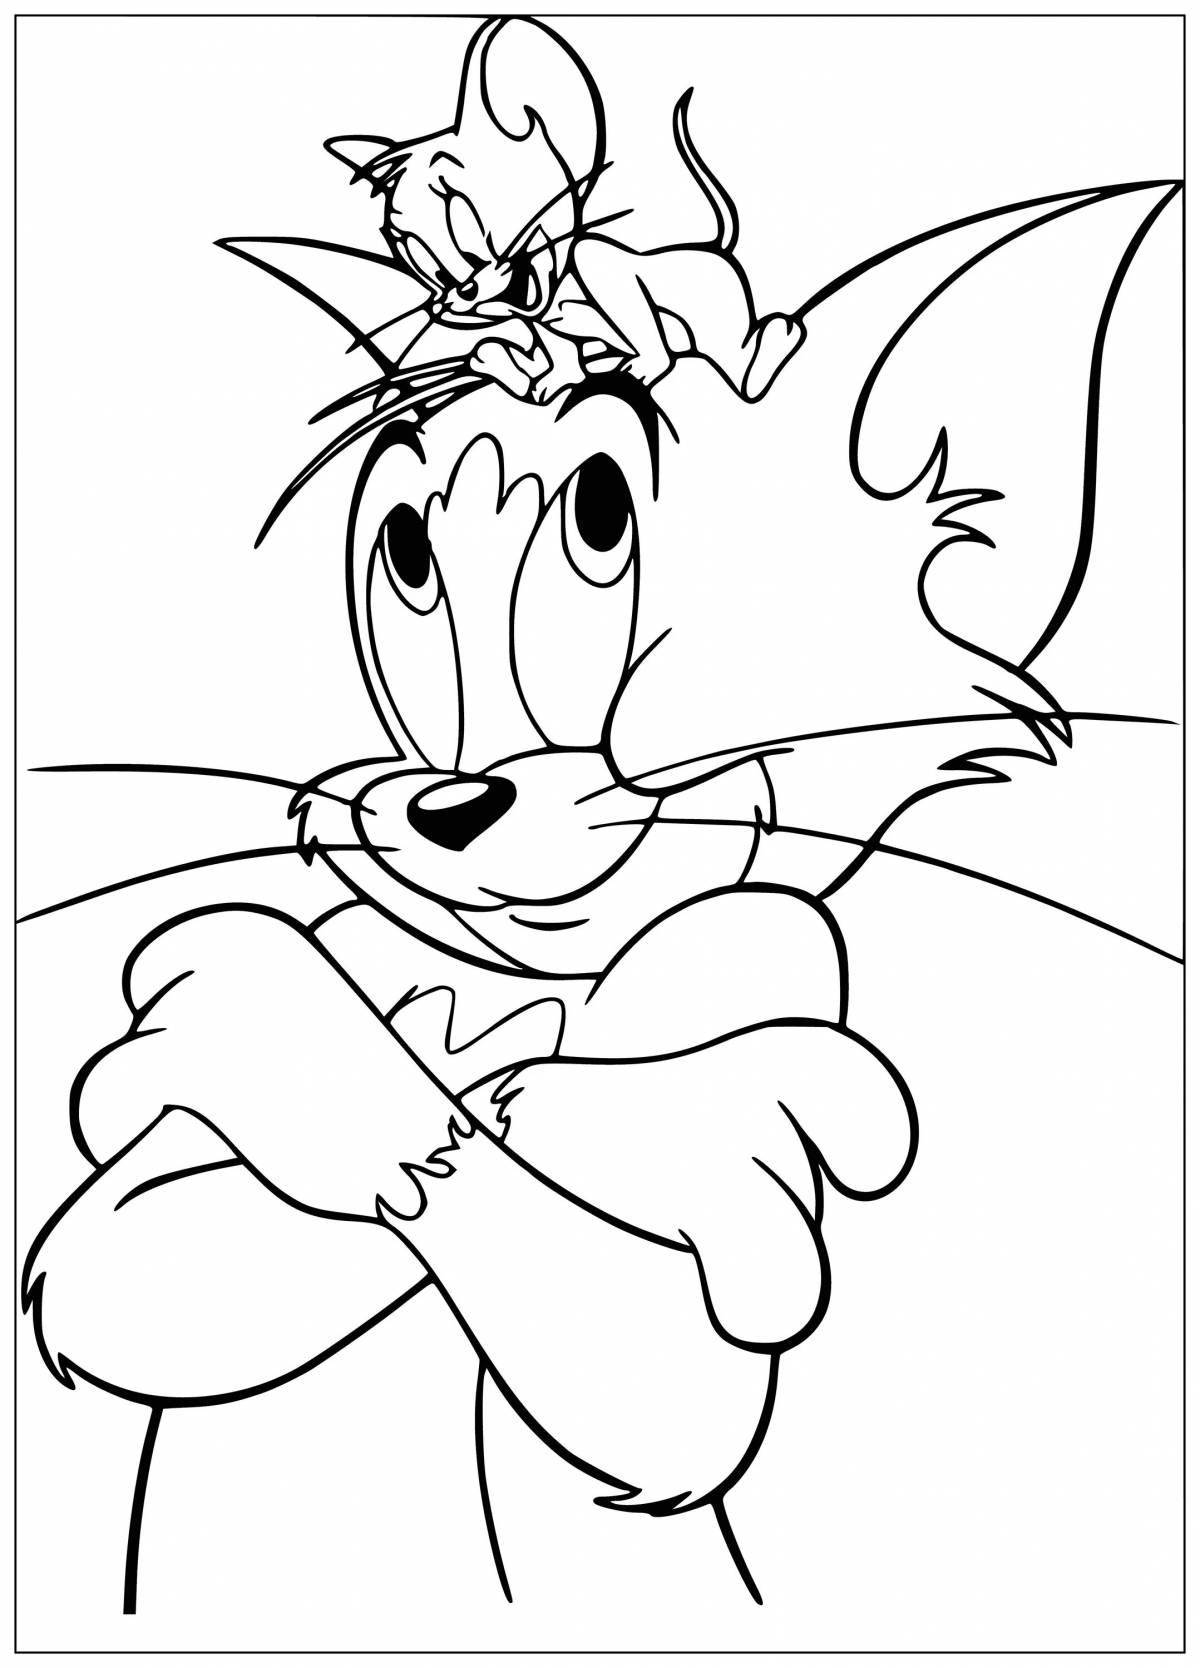 Fun coloring tom and jerry